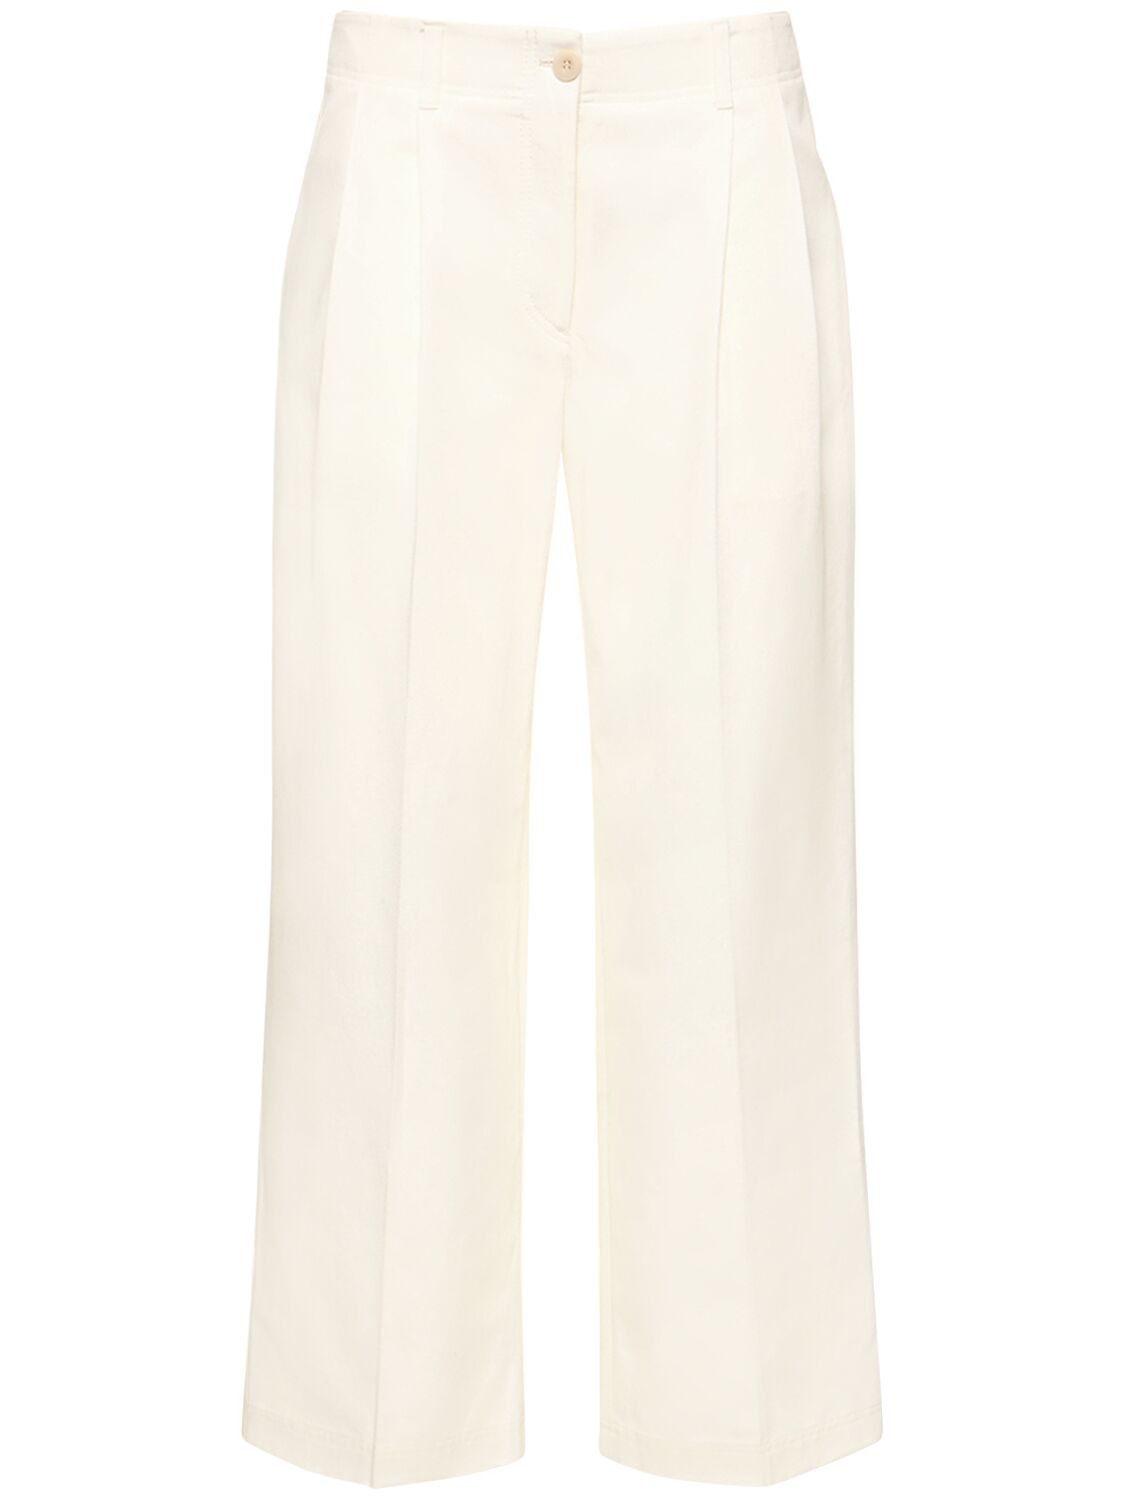 Totême Relaxed Twill Cotton Pants In White